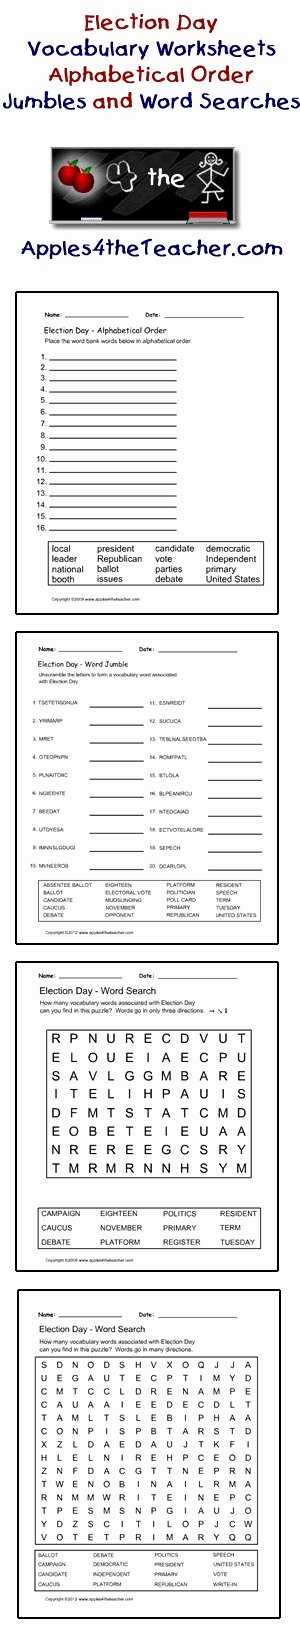 The Electoral Process Worksheet Luxury 25 Best Ideas About Election Day On Pinterest